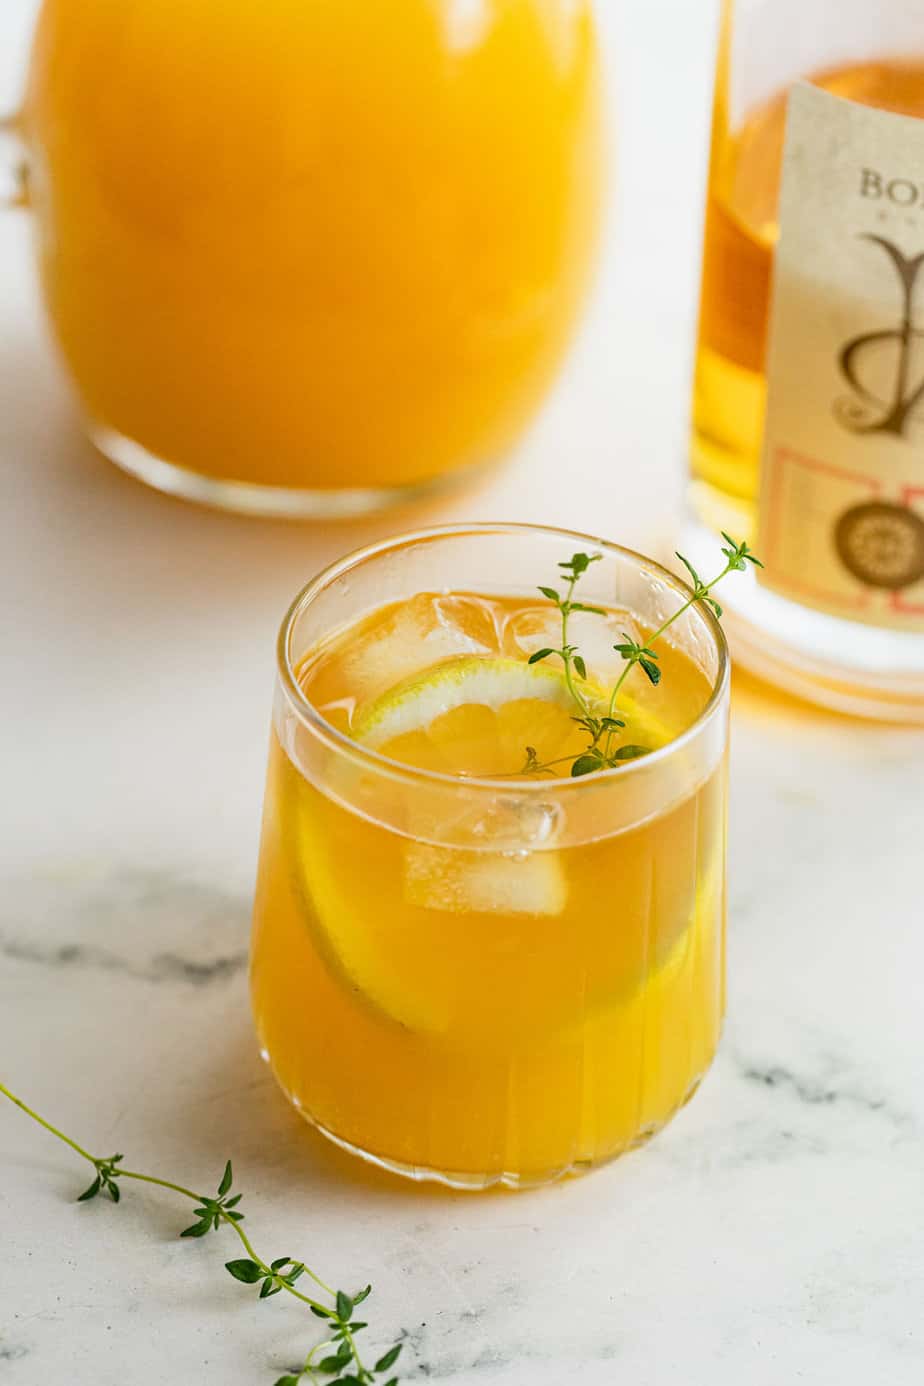 rum and orange juice garnished with fresh thyme